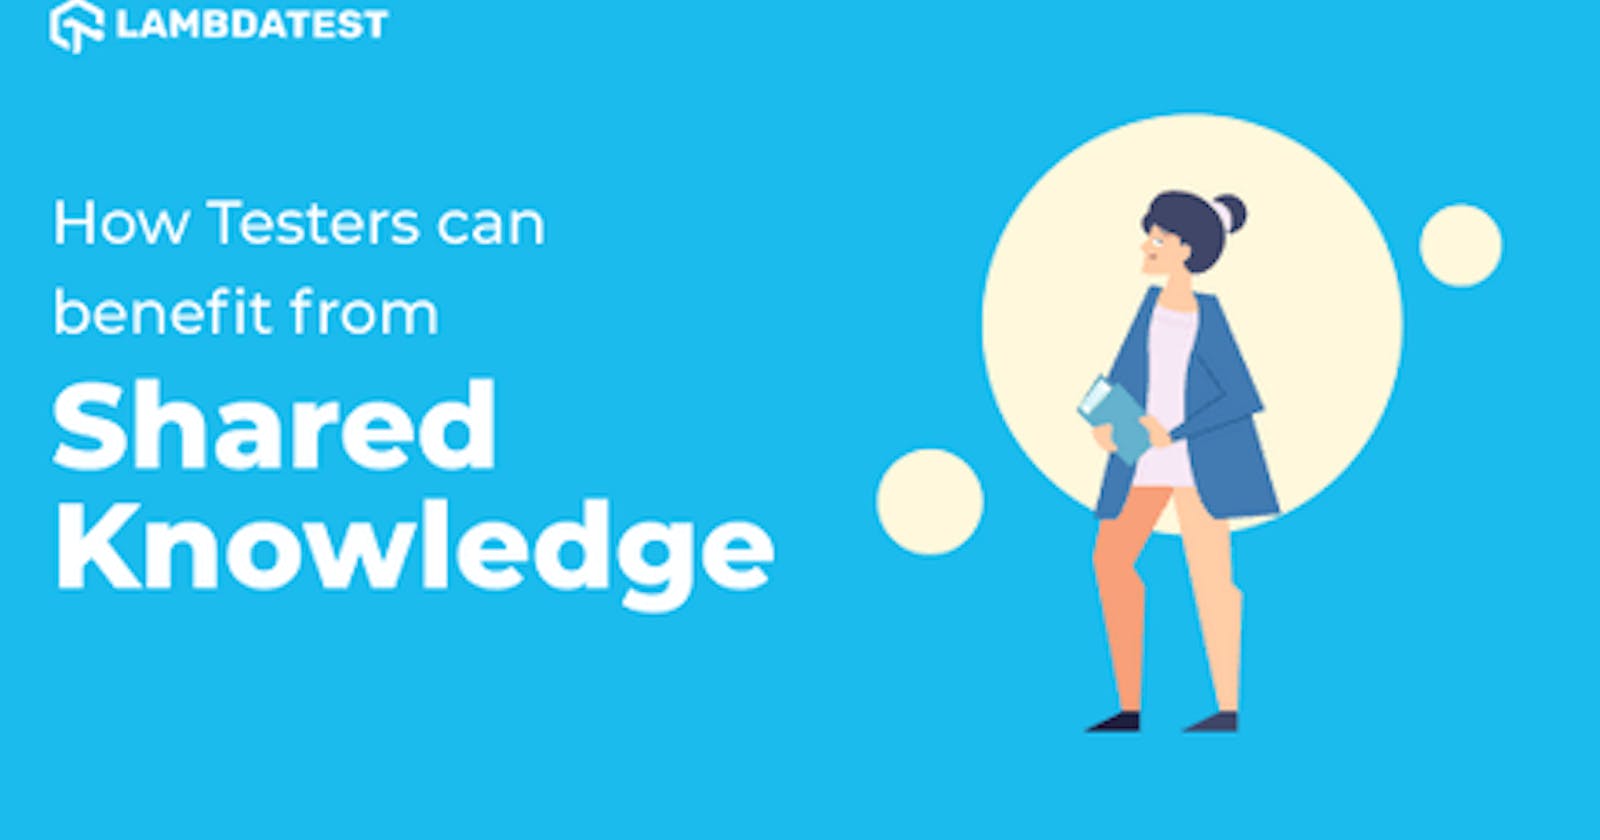 How Testers can benefit from Shared Knowledge